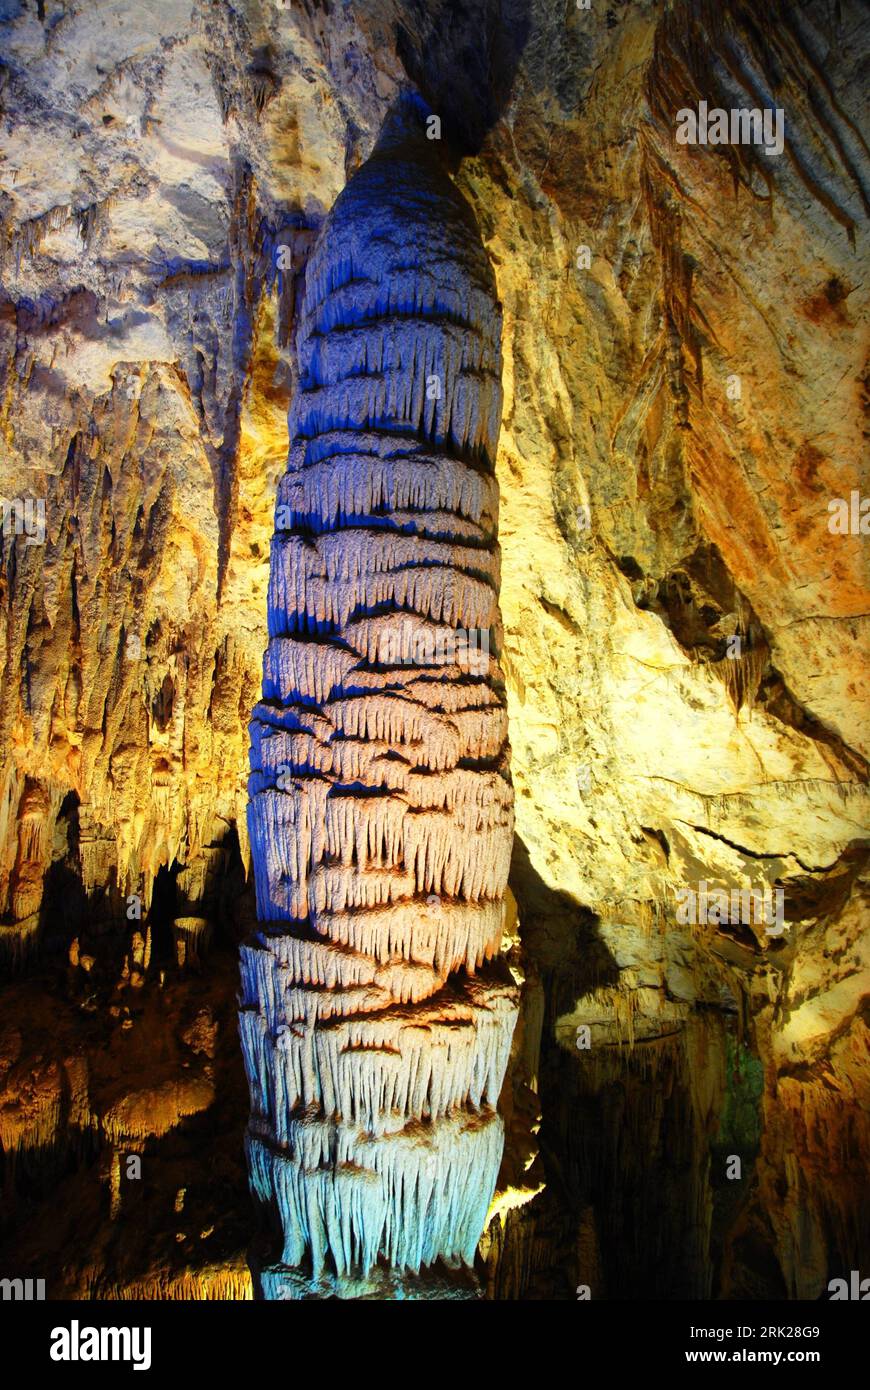 Bildnummer: 53153735  Datum: 28.04.2009  Copyright: imago/Xinhua  Photo taken on April 24 shows the stalactite in the Furong Karst Cave in Wulong County of southwest China s Chongqing. kbdig   Tropfstein in der Furong Karst Höhle in Wulong County of Südwest China s Chongqing. Tropfsteinhöhle hoch    Bildnummer 53153735 Date 28 04 2009 Copyright Imago XINHUA Photo Taken ON April 24 Shows The stalactite in The Furong Karst Cave in Wulong County of Southwest China S Chongqing Kbdig Stalactite in the Furong Karst Cave in Wulong County of Southwest China S Chongqing Cave vertical Stock Photo